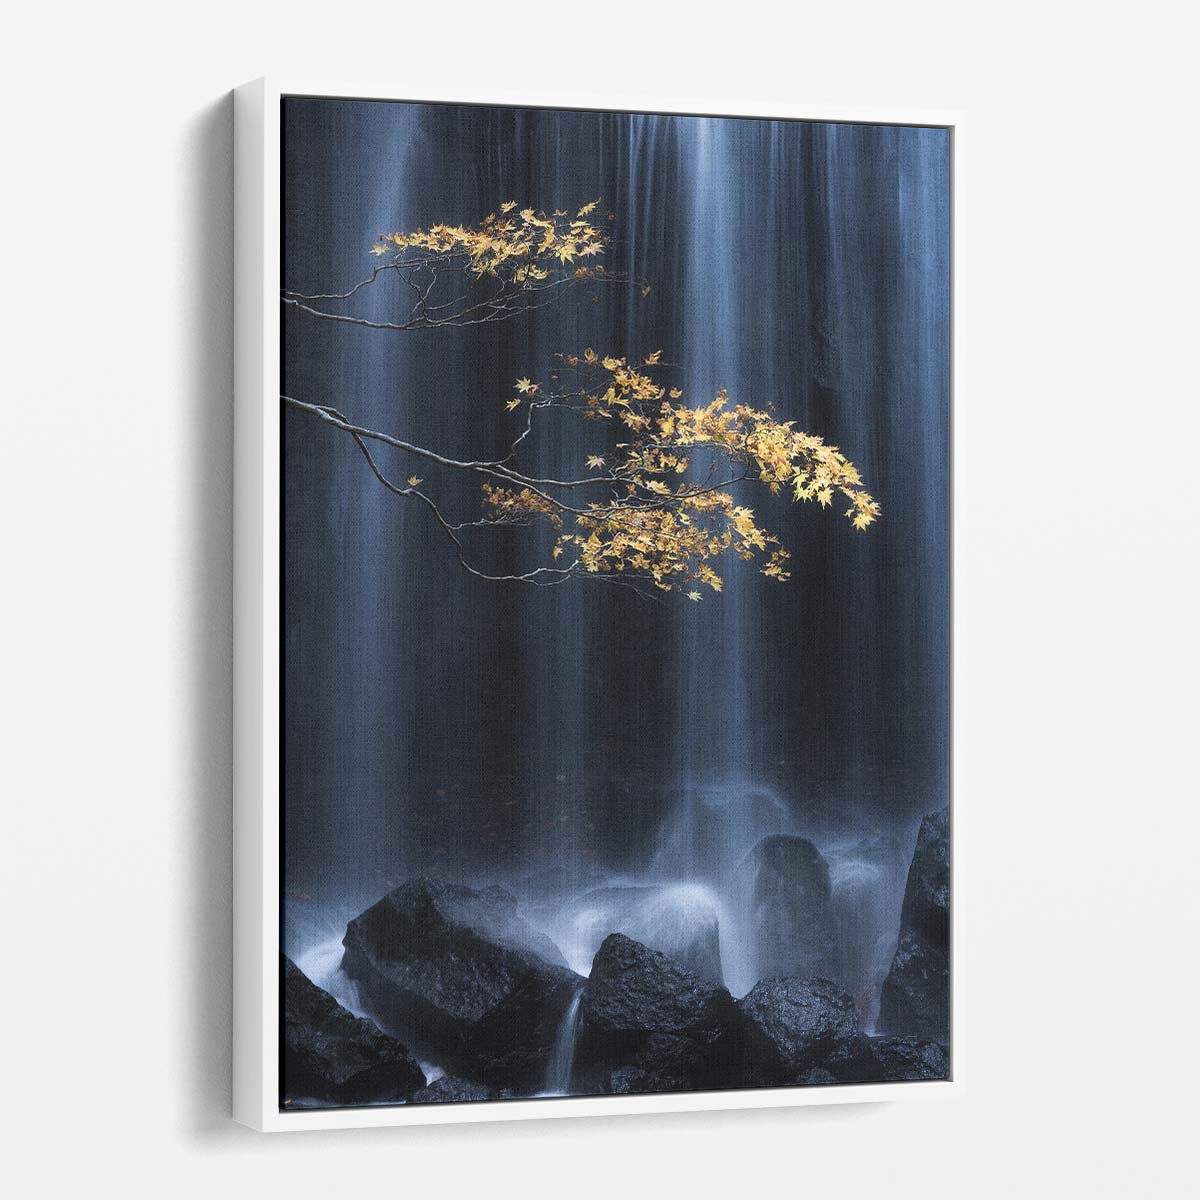 Tranquil Autumn Waterfall Landscape - Zen Meditation Photography Art by Luxuriance Designs, made in USA